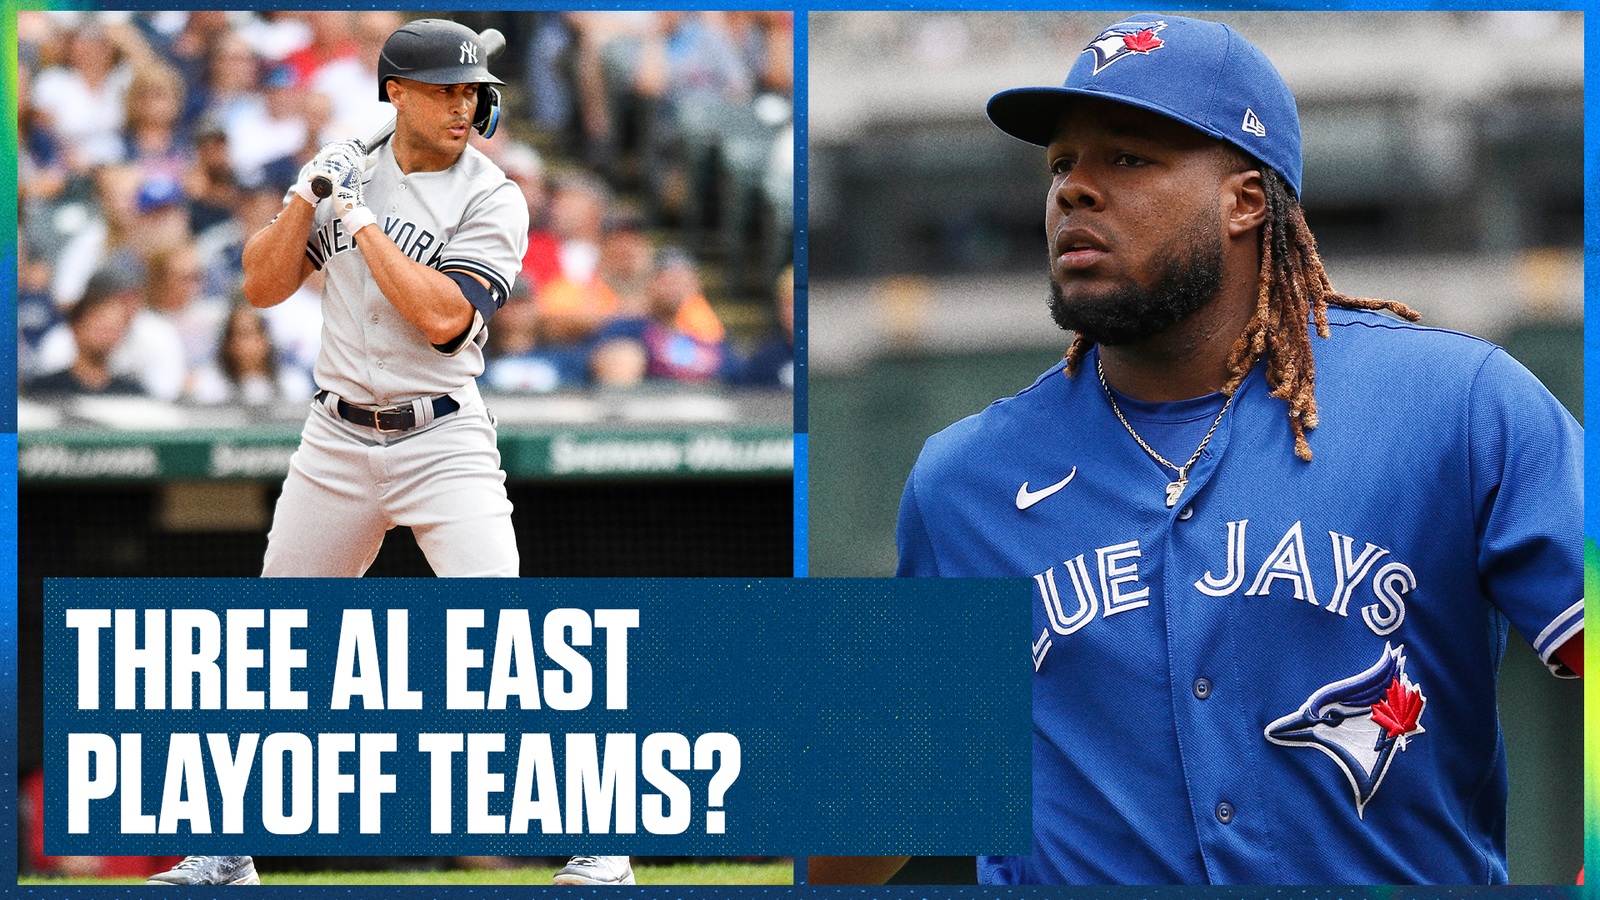 Will we see three AL East teams in the Playoffs?